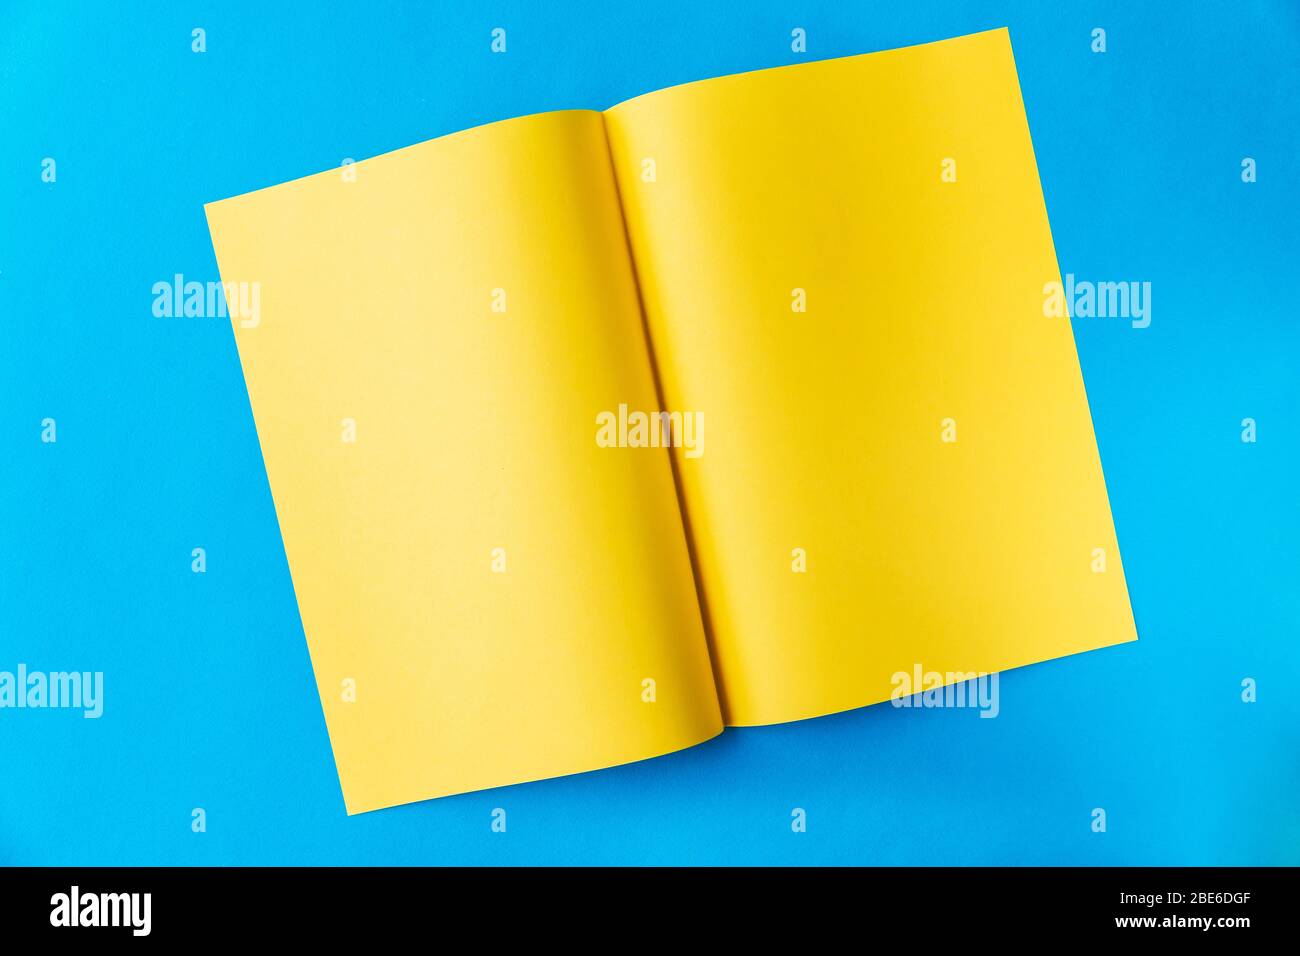 275 A3 Paper Stock Photos - Free & Royalty-Free Stock Photos from Dreamstime